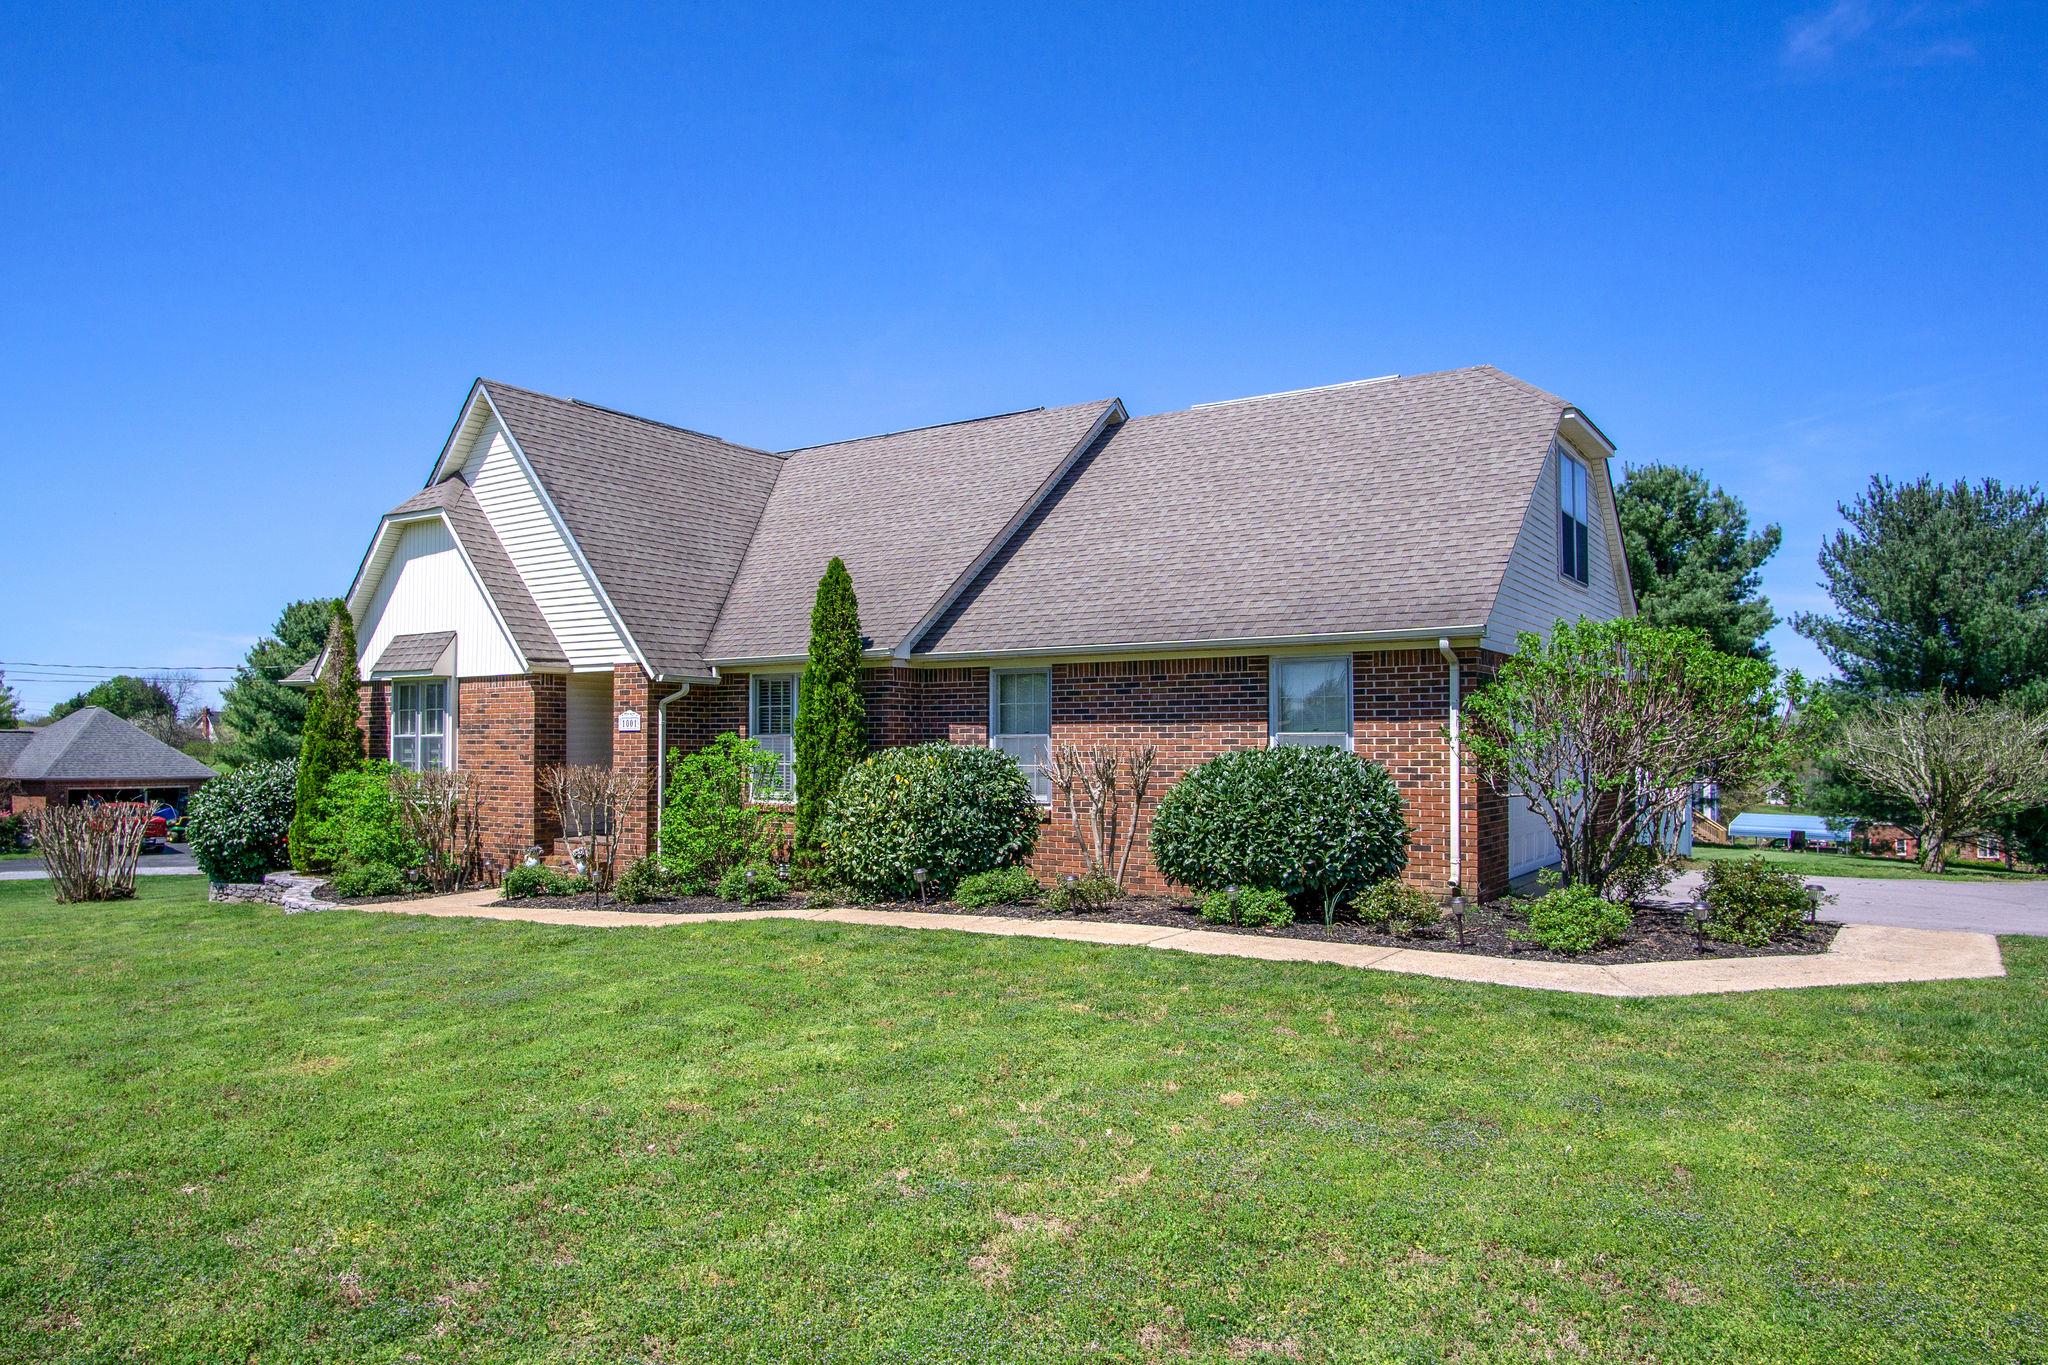 Don't miss this spectacular all brick large home on an acre in Maury county.